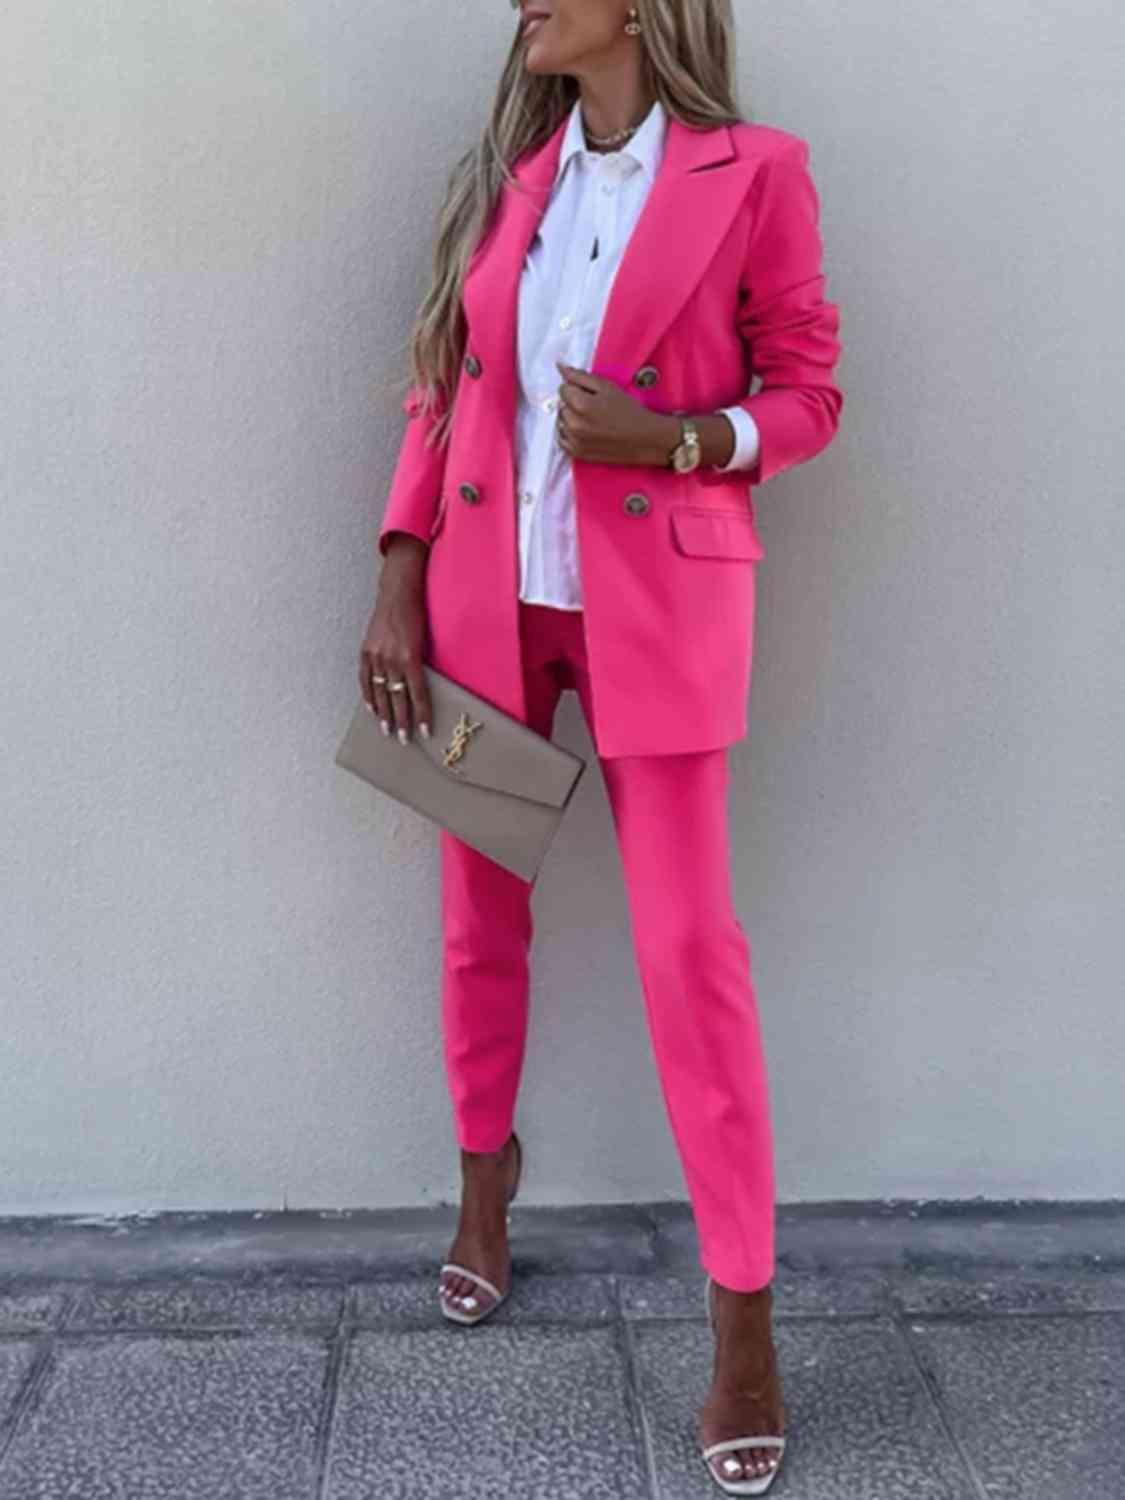 a woman wearing a pink suit and white shirt